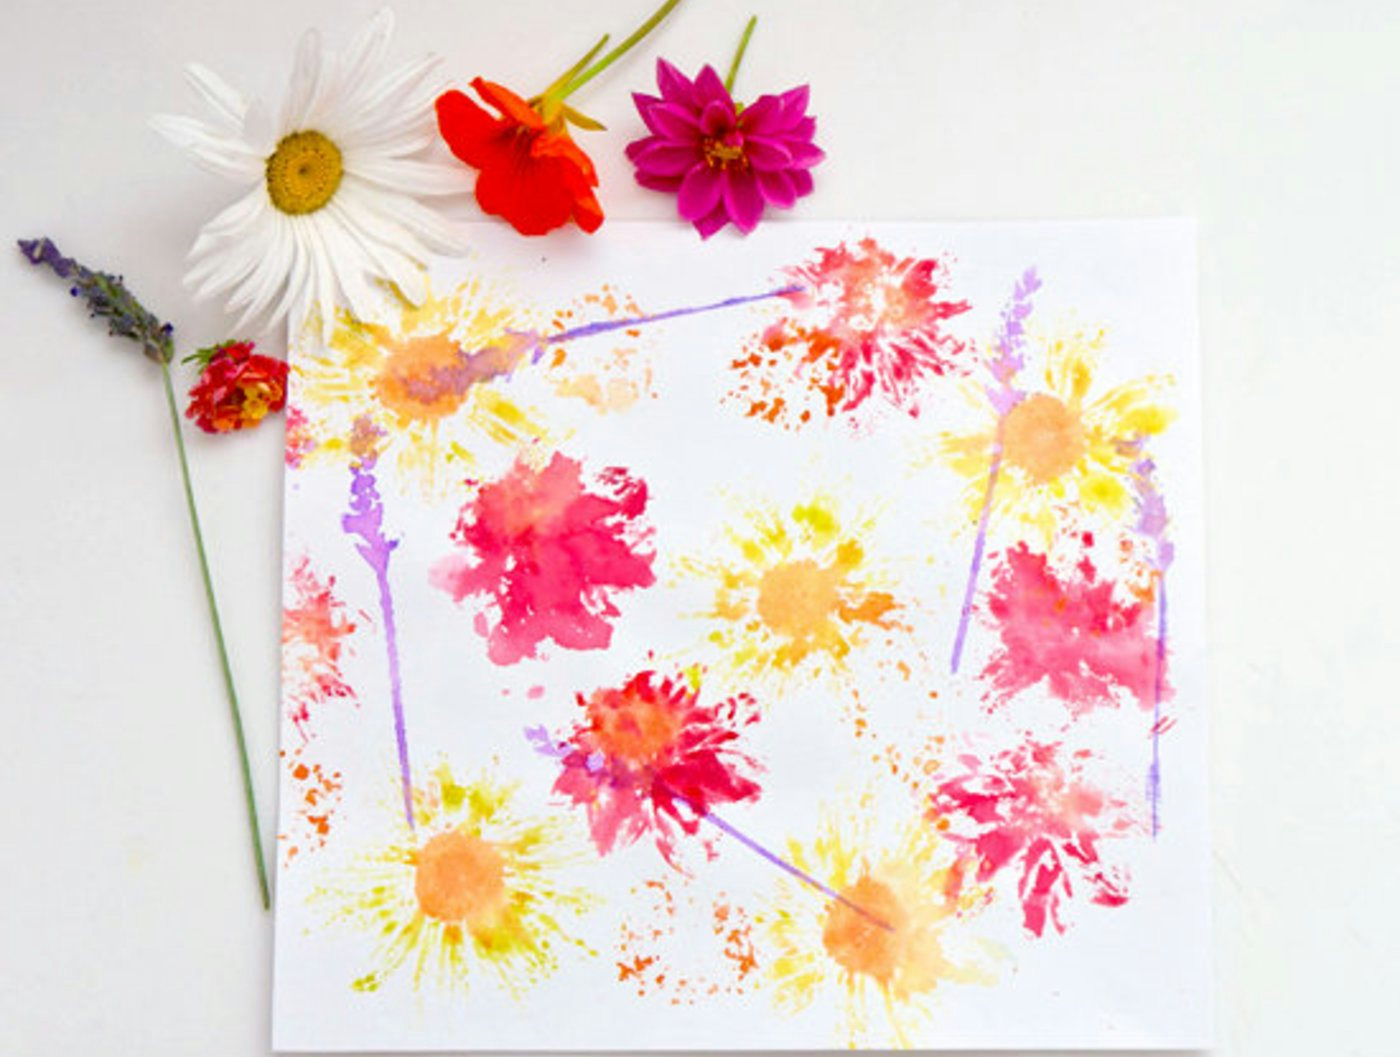 Thursday Art Play: Scented Flowers